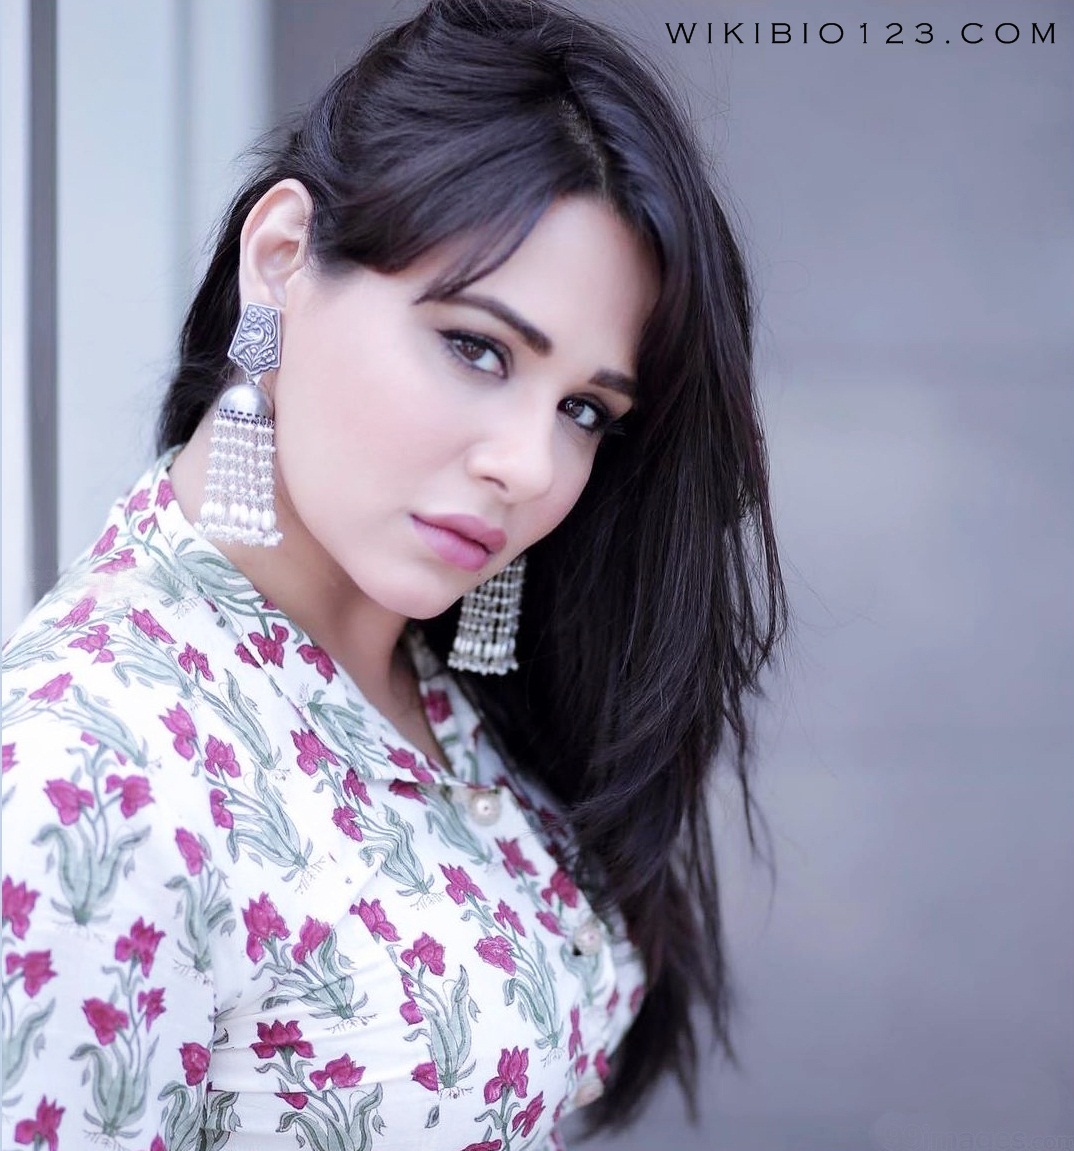 Mandy Takhar HD Images Wallpapers Photos